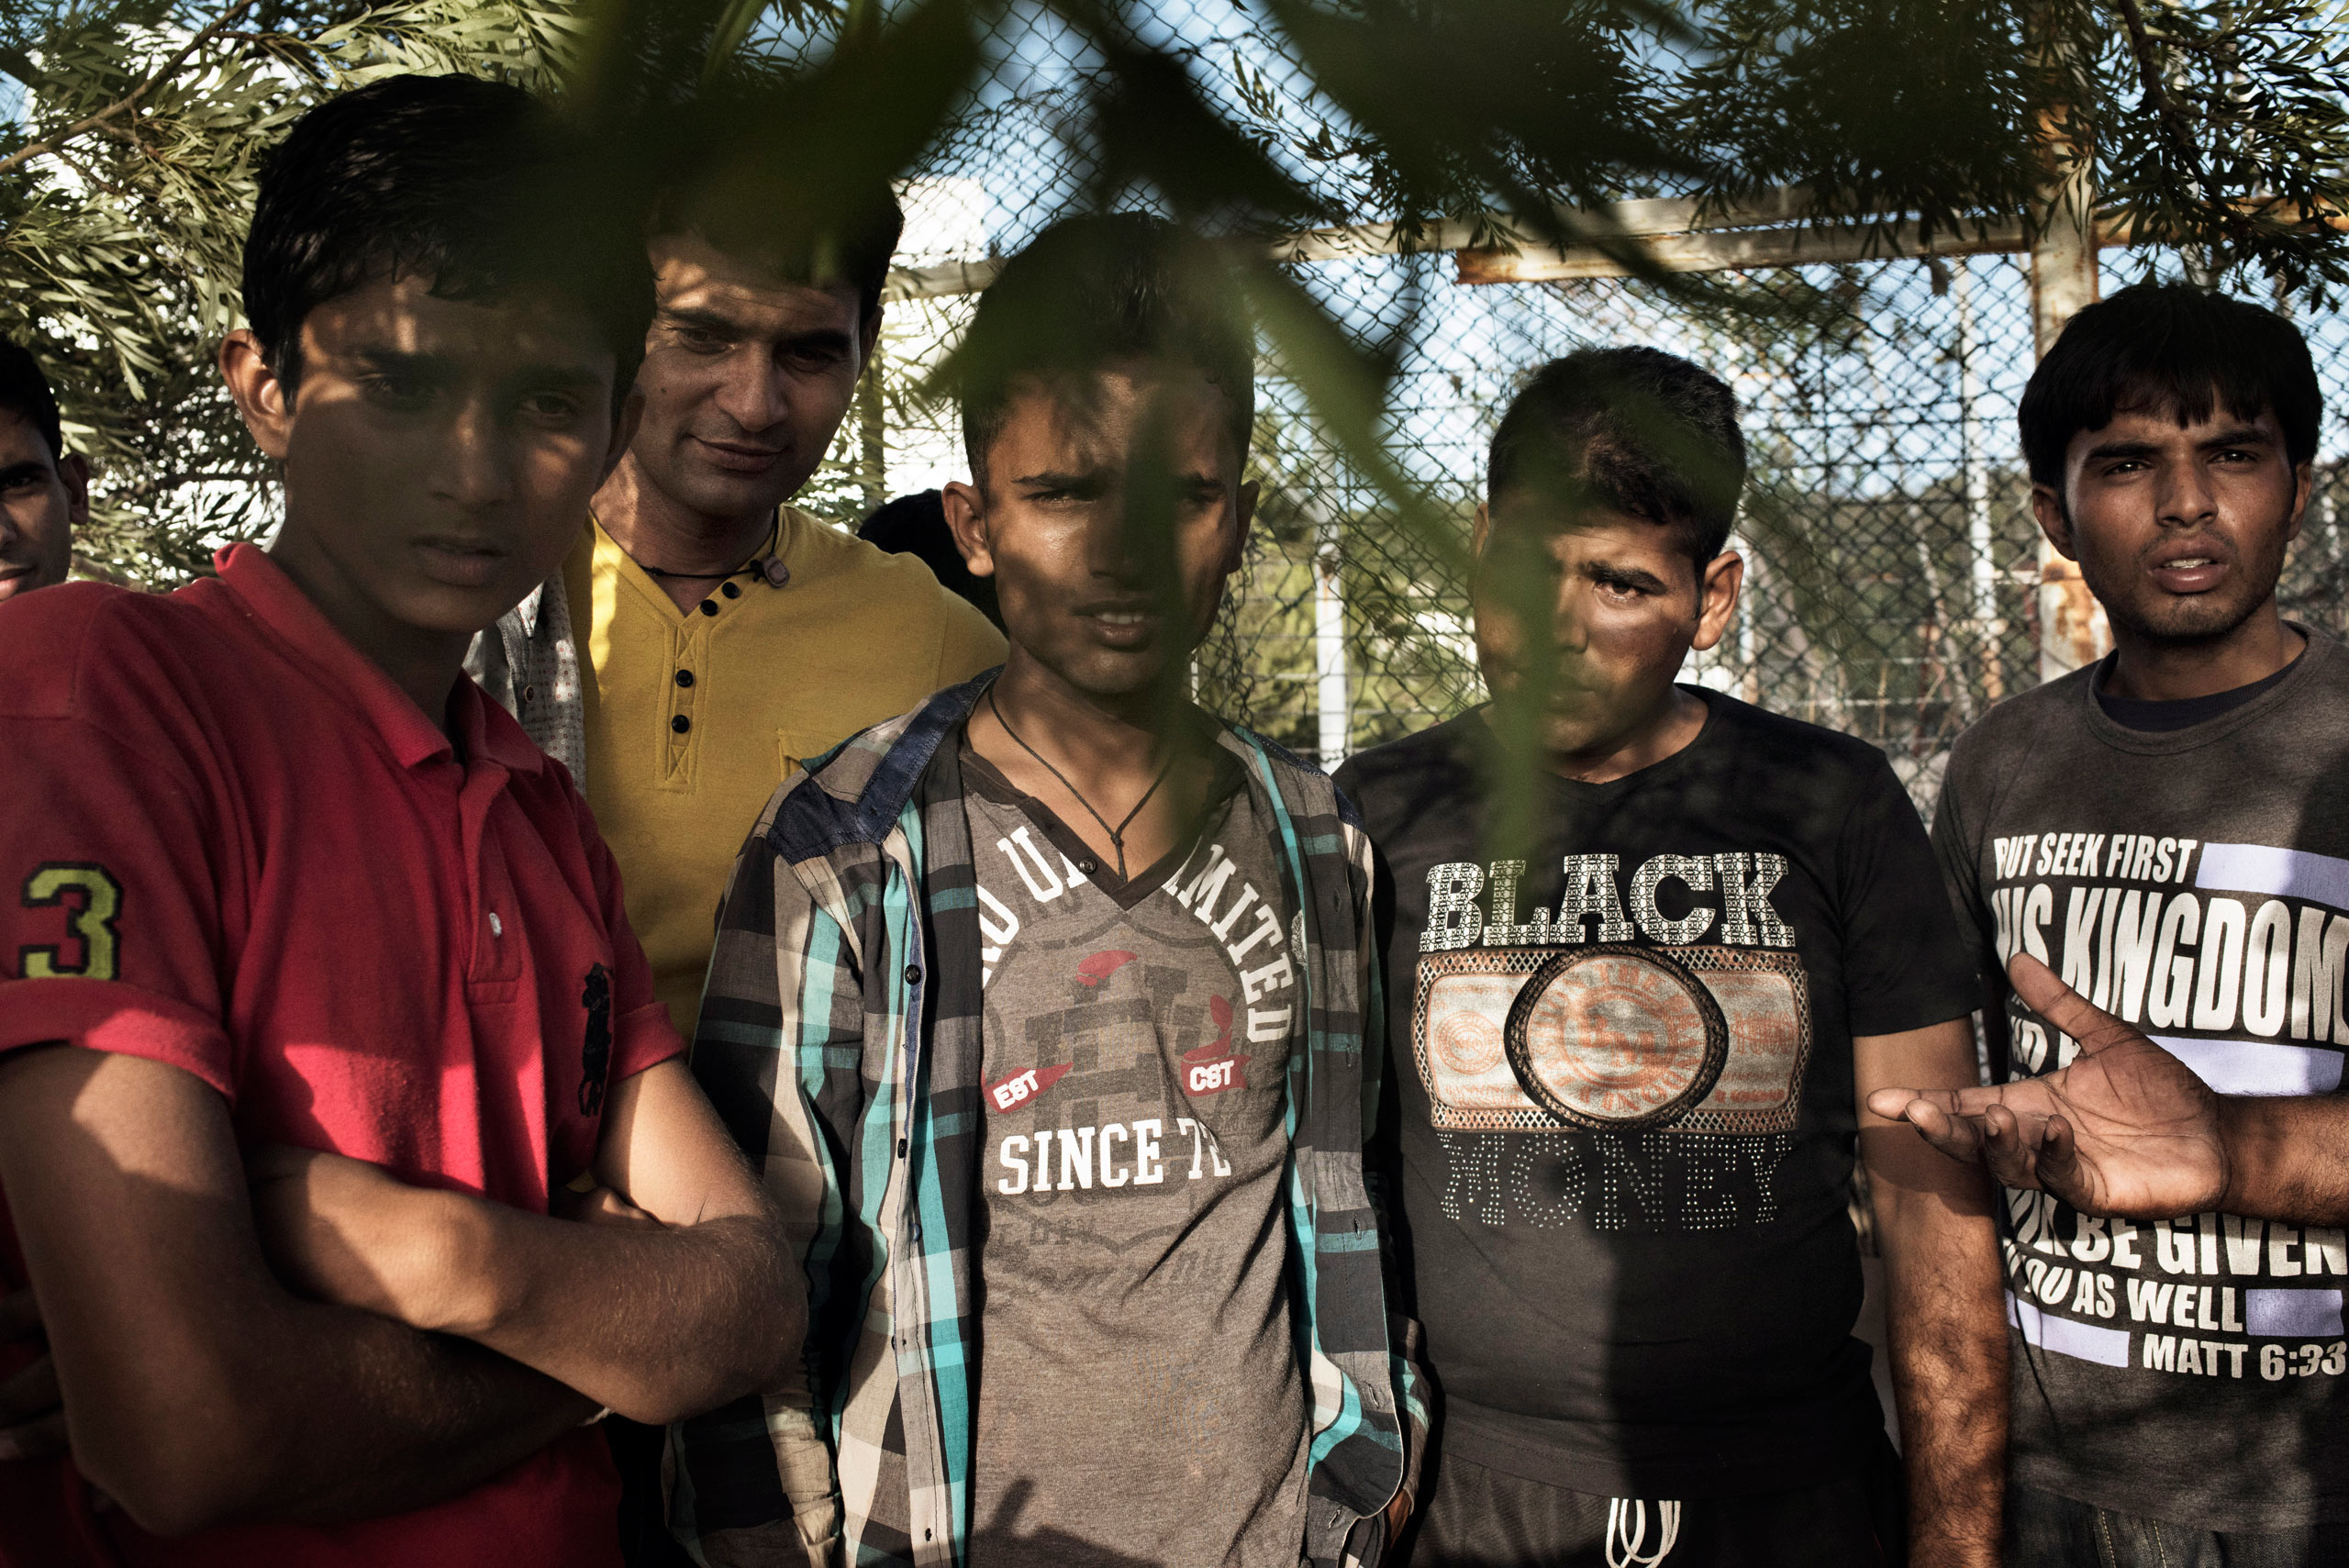 A group of Pakistani men wait at a park next to the bus station in Bodrum,  waiting to make the journey to Greece on a dinghy. Bodrum, Turkey, Sept. 16, 2015.